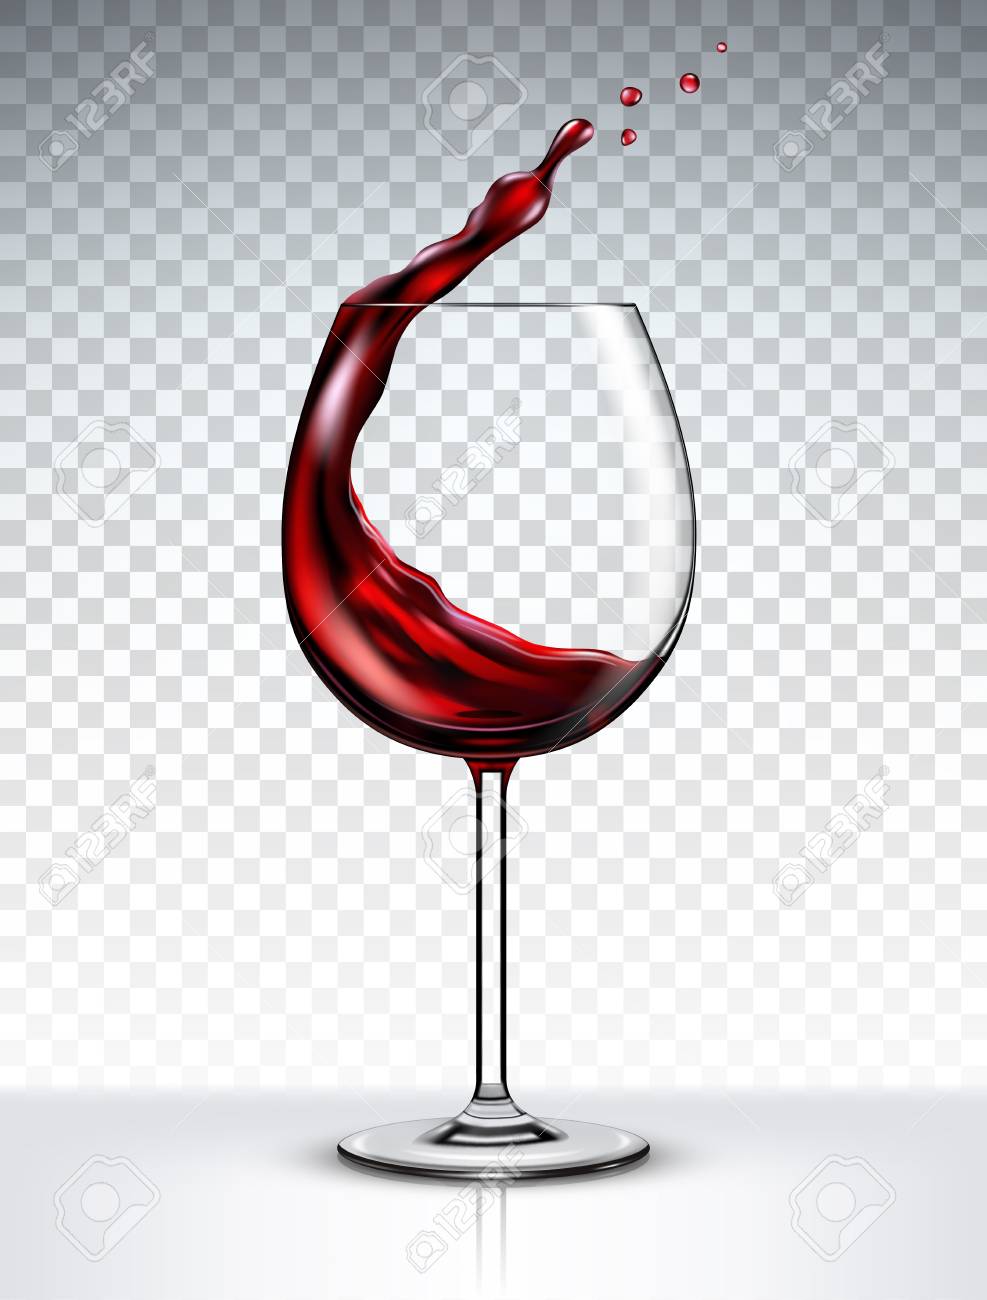 Glass with a splash of red wine isolated on transparent background